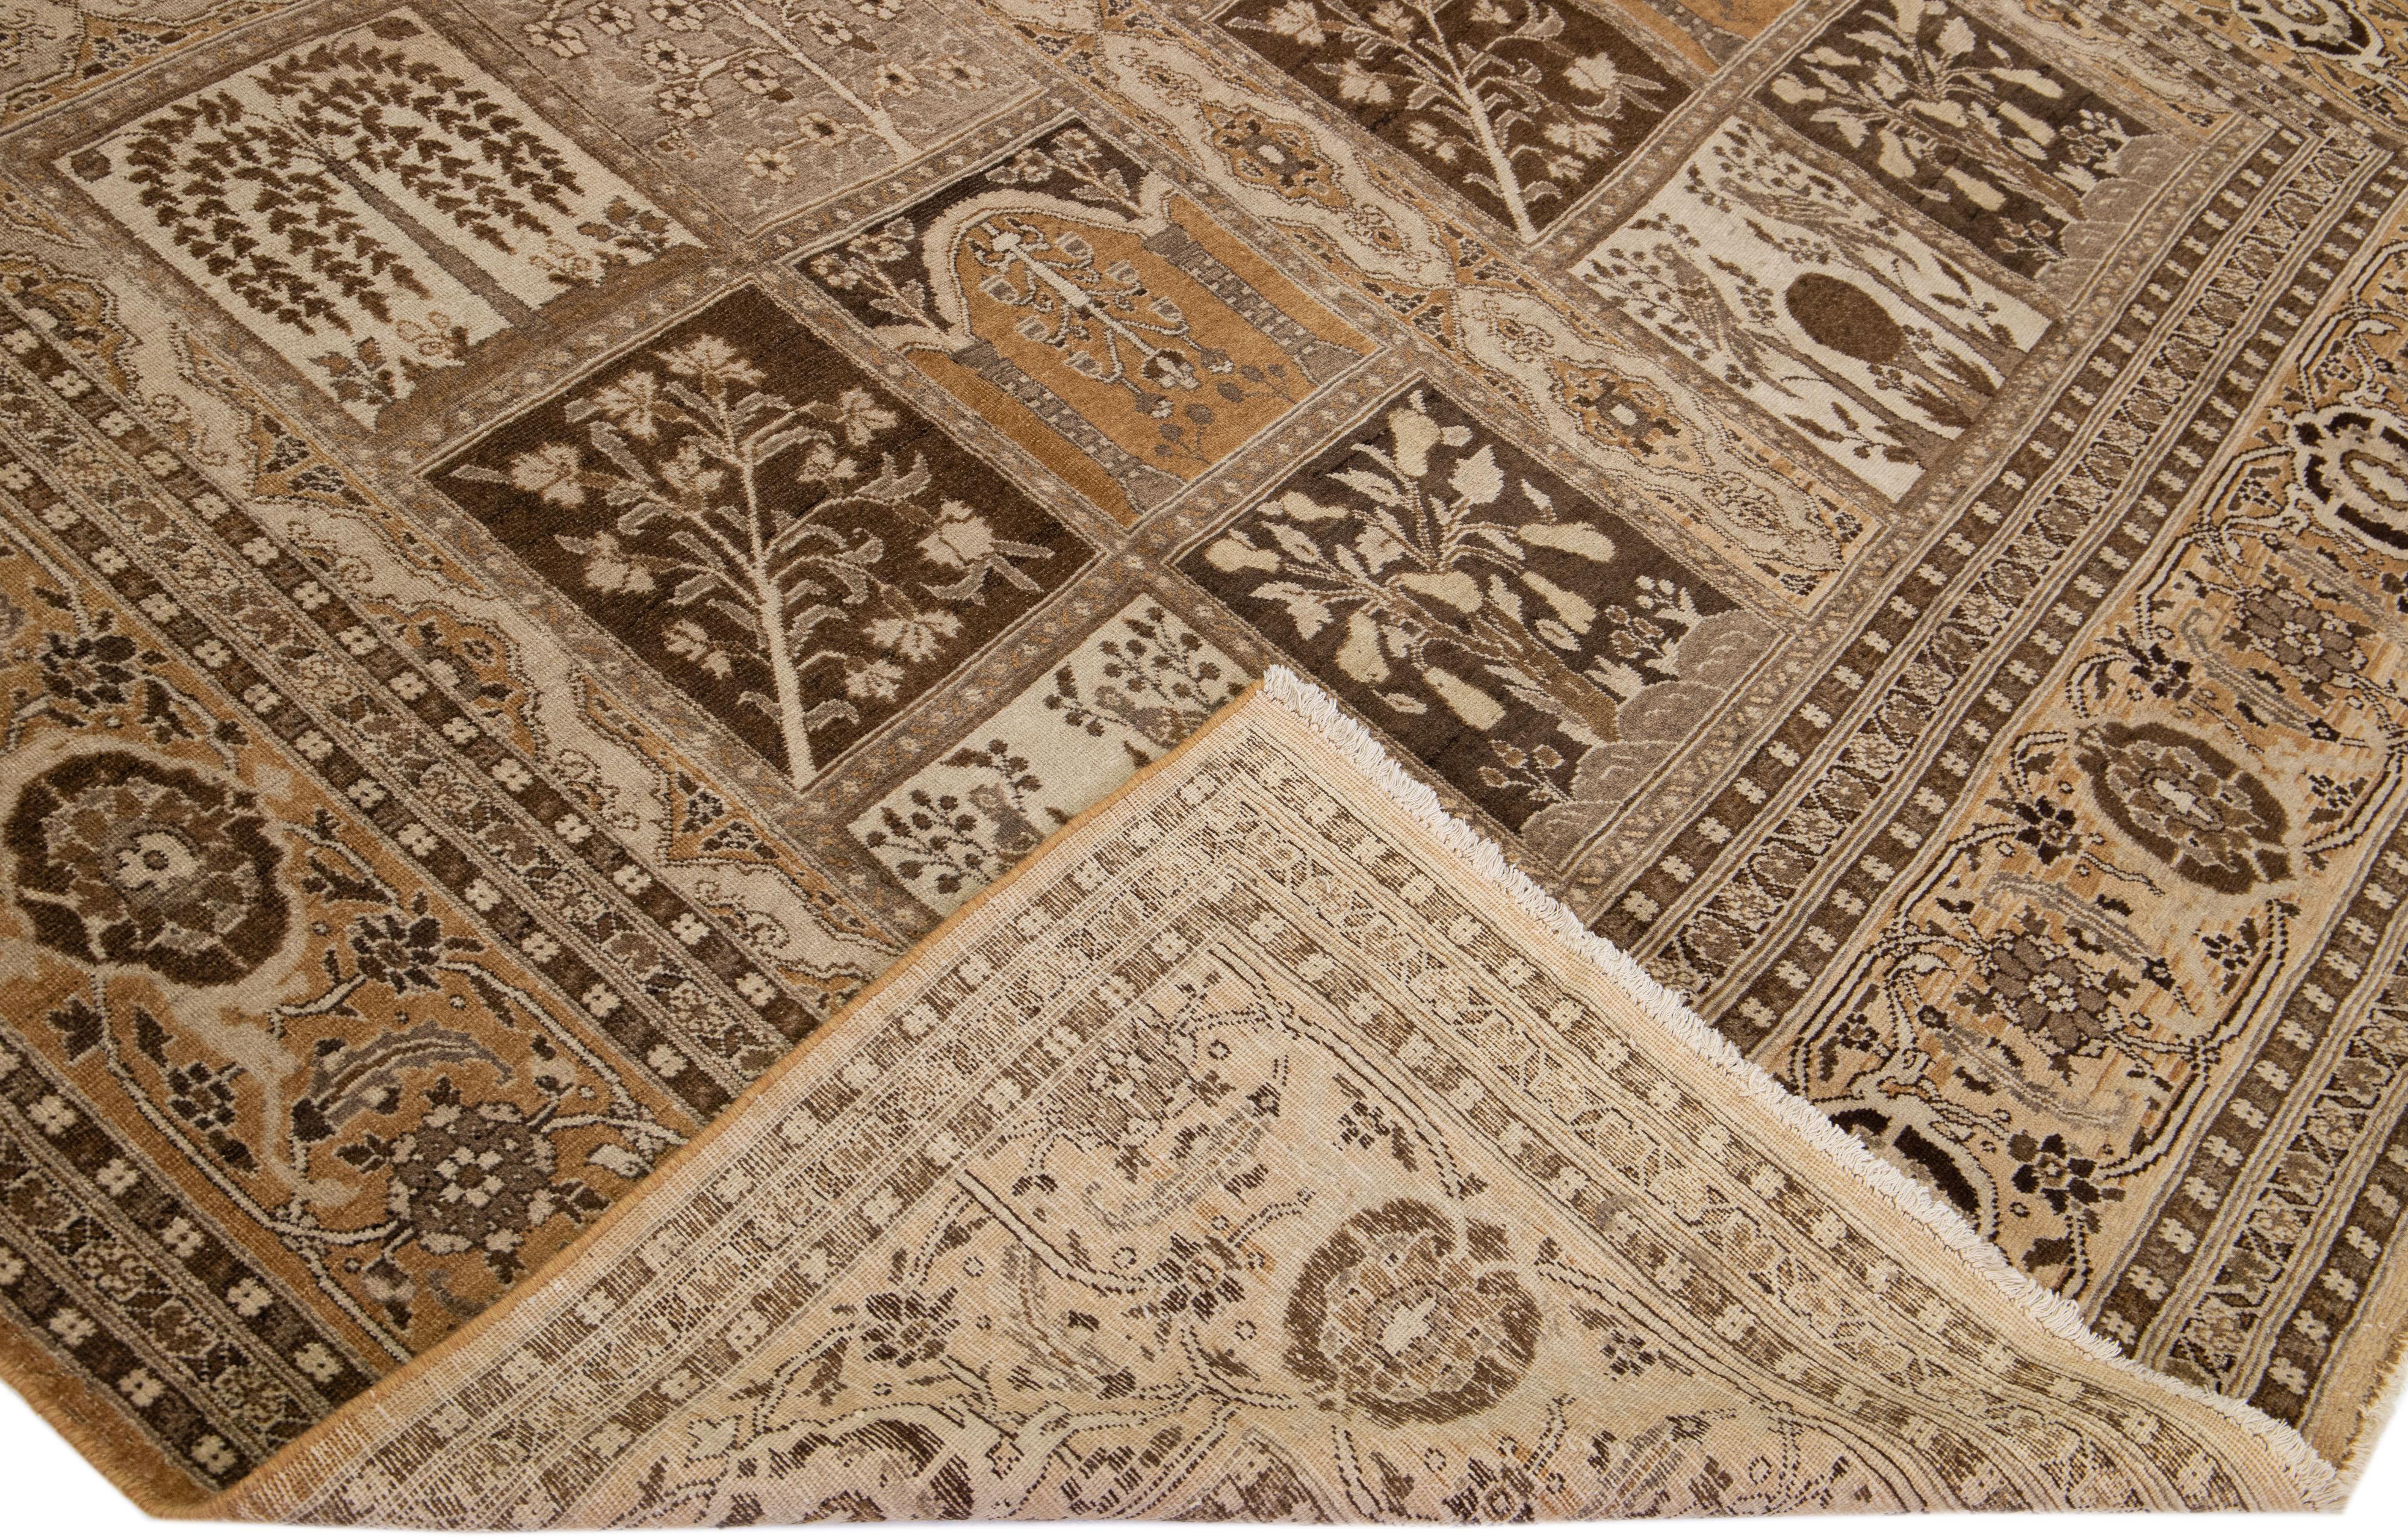 Beautiful antique Tabriz hand-knotted wool rug with a brown color field. This Persian rug has beige and tan accents in a gorgeous all-over geometric floral design.

This rug measures: 9'6